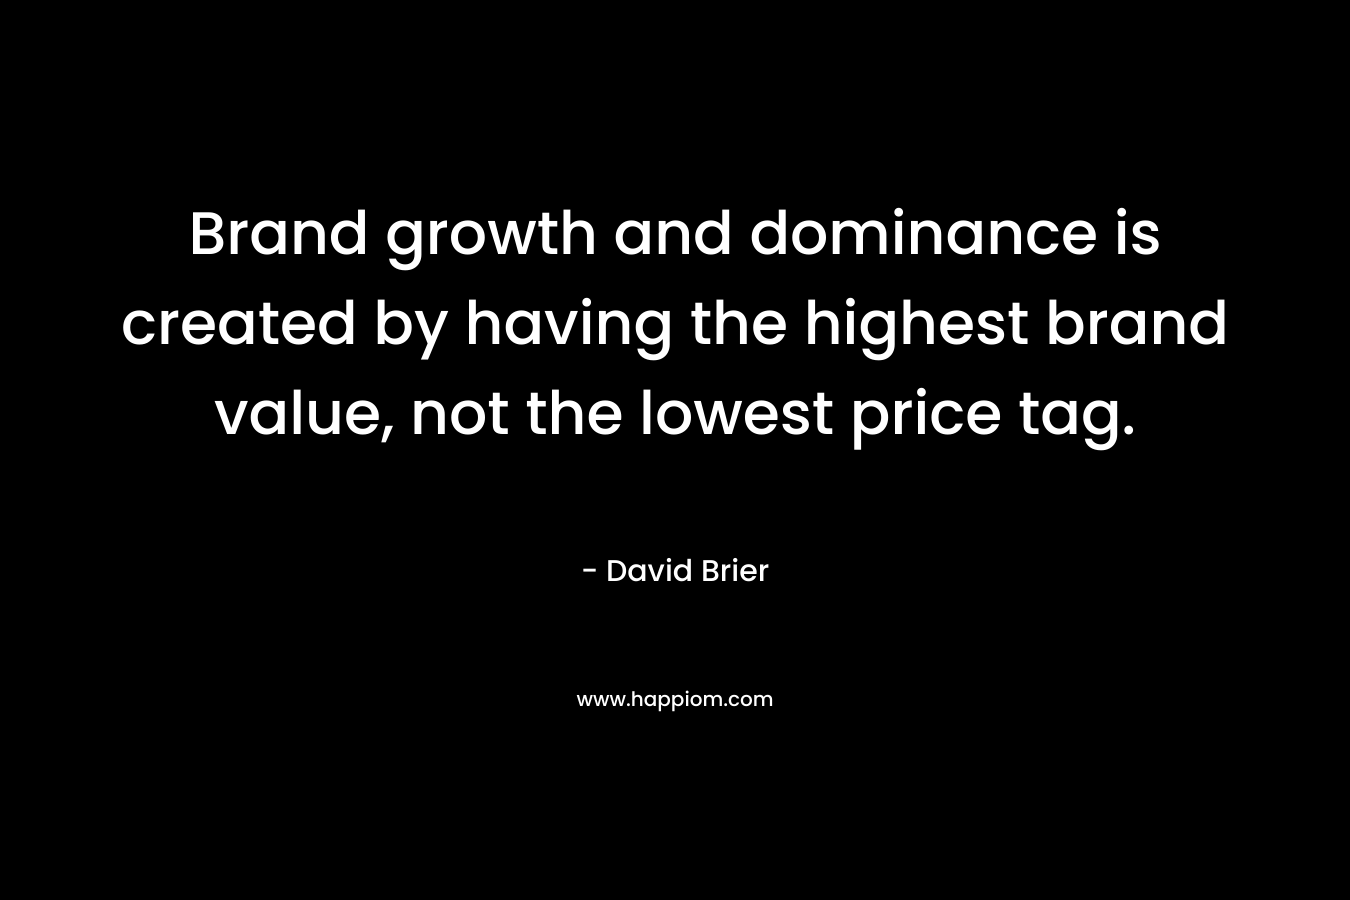 Brand growth and dominance is created by having the highest brand value, not the lowest price tag.